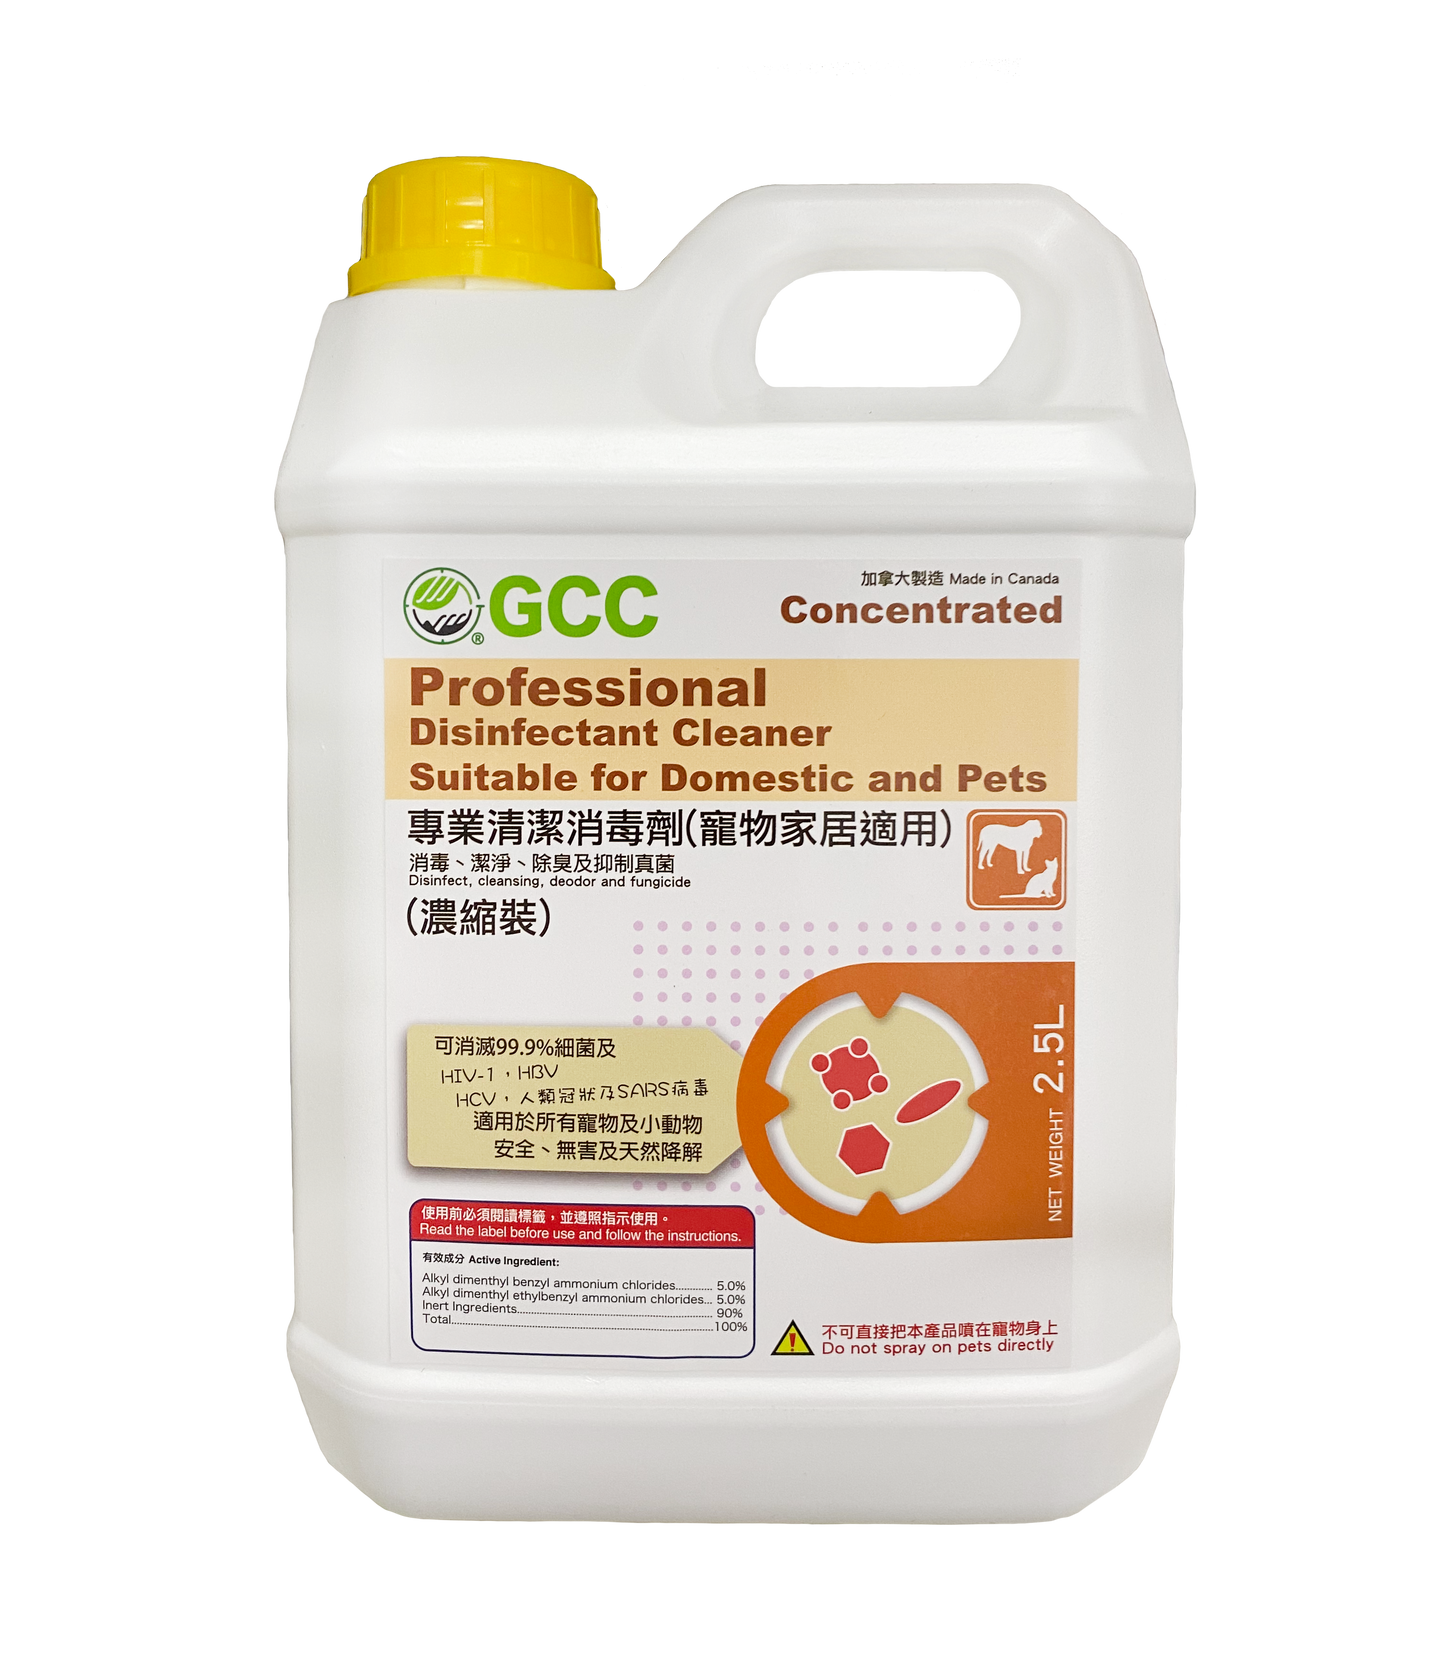 GCC ® professional cleaning disinfectant (pet home applicable) 2.5 L (liter) concentrated